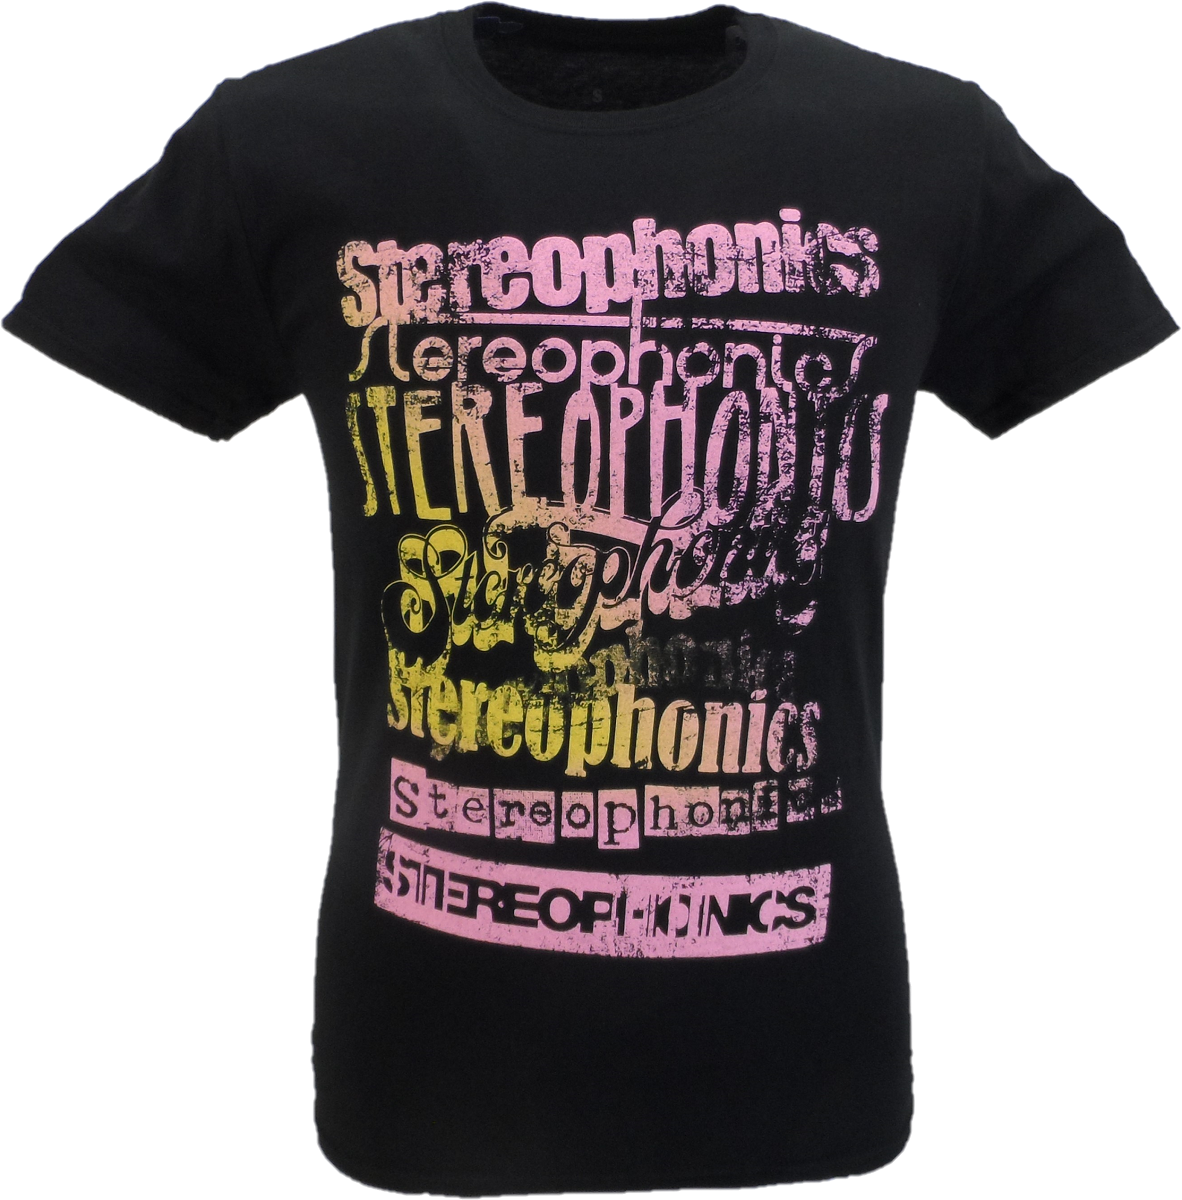 Mens Official Licensed Stereophonics Logos T Shirt